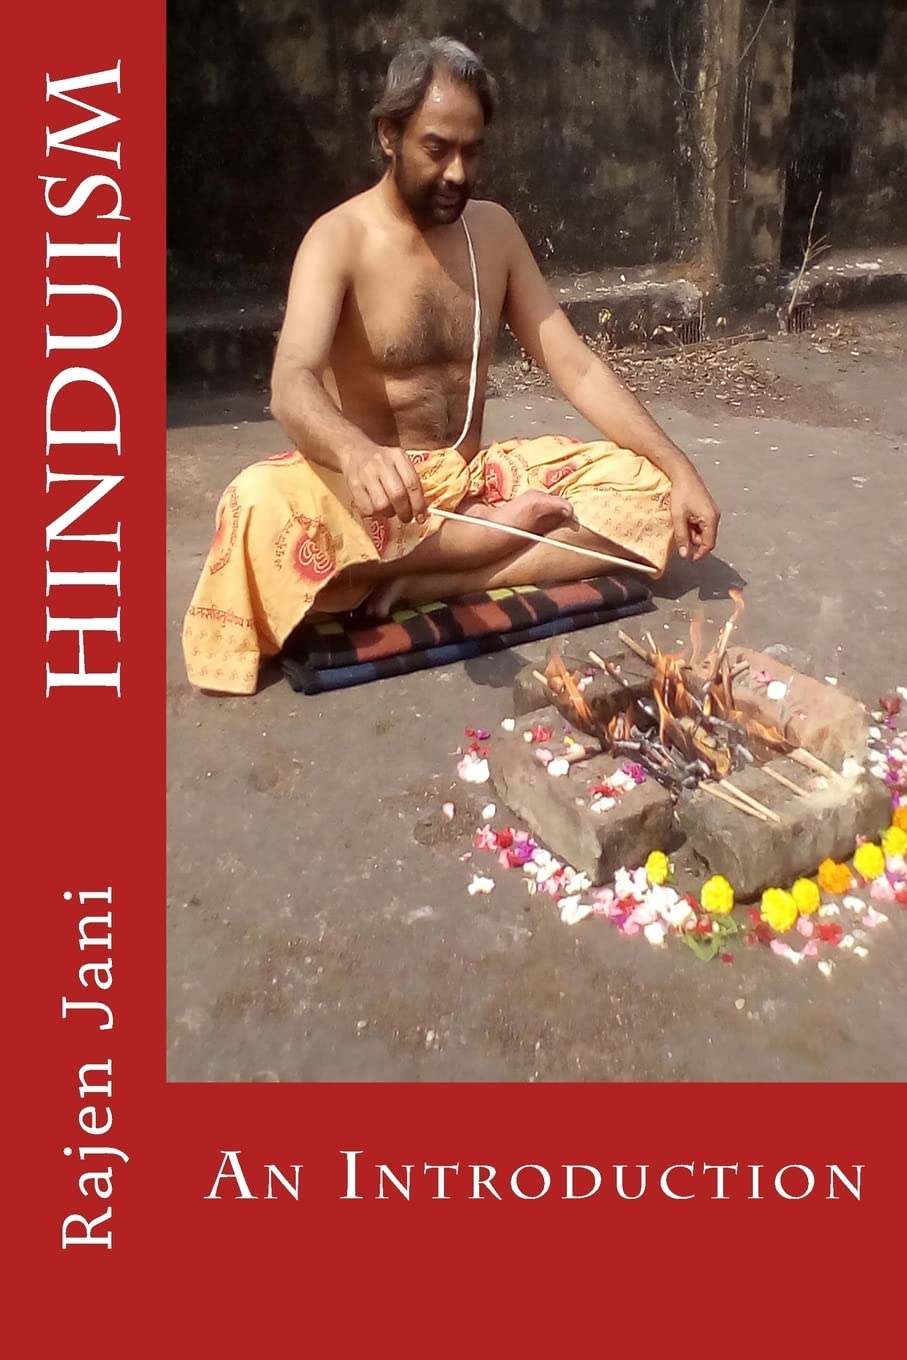 Hinduism: An Introduction by Rajen Jani